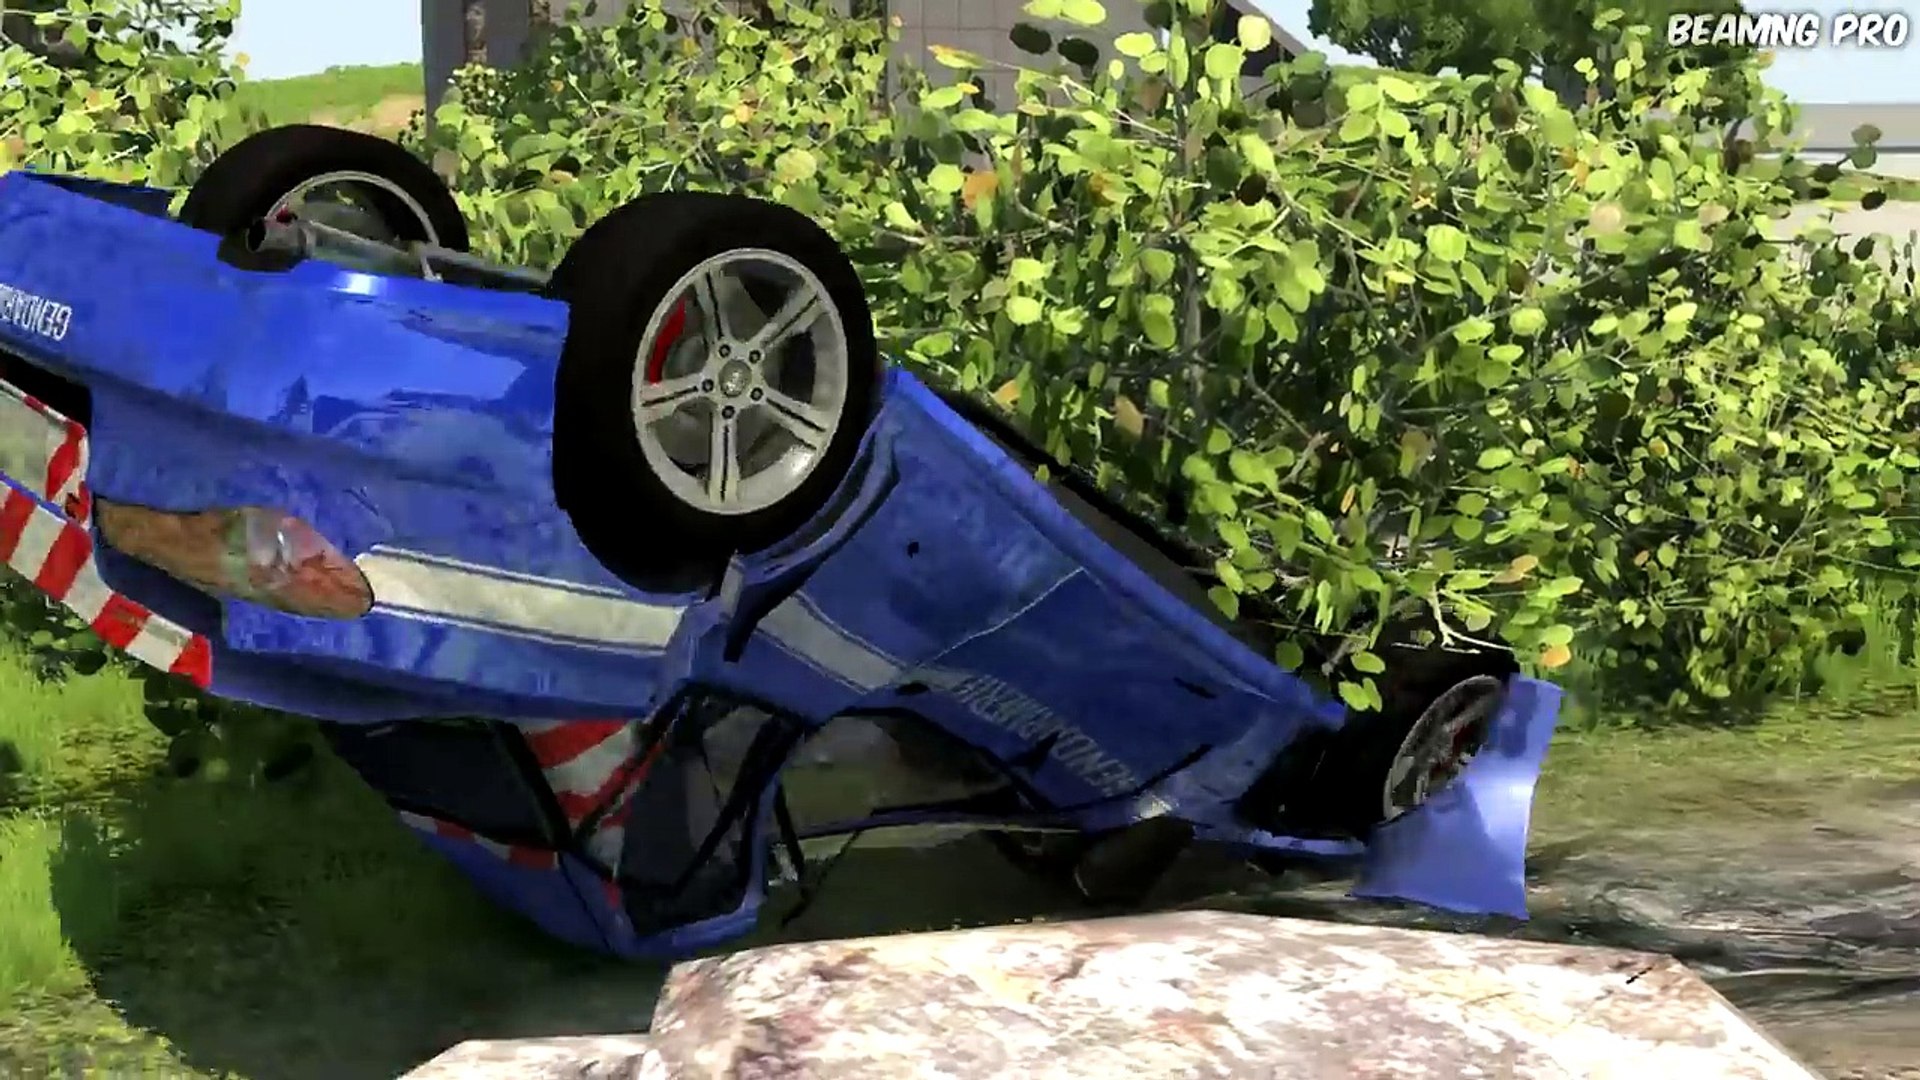 Beamng.drive crashes compilations, rollovers, random vehicle, fails compilations #9